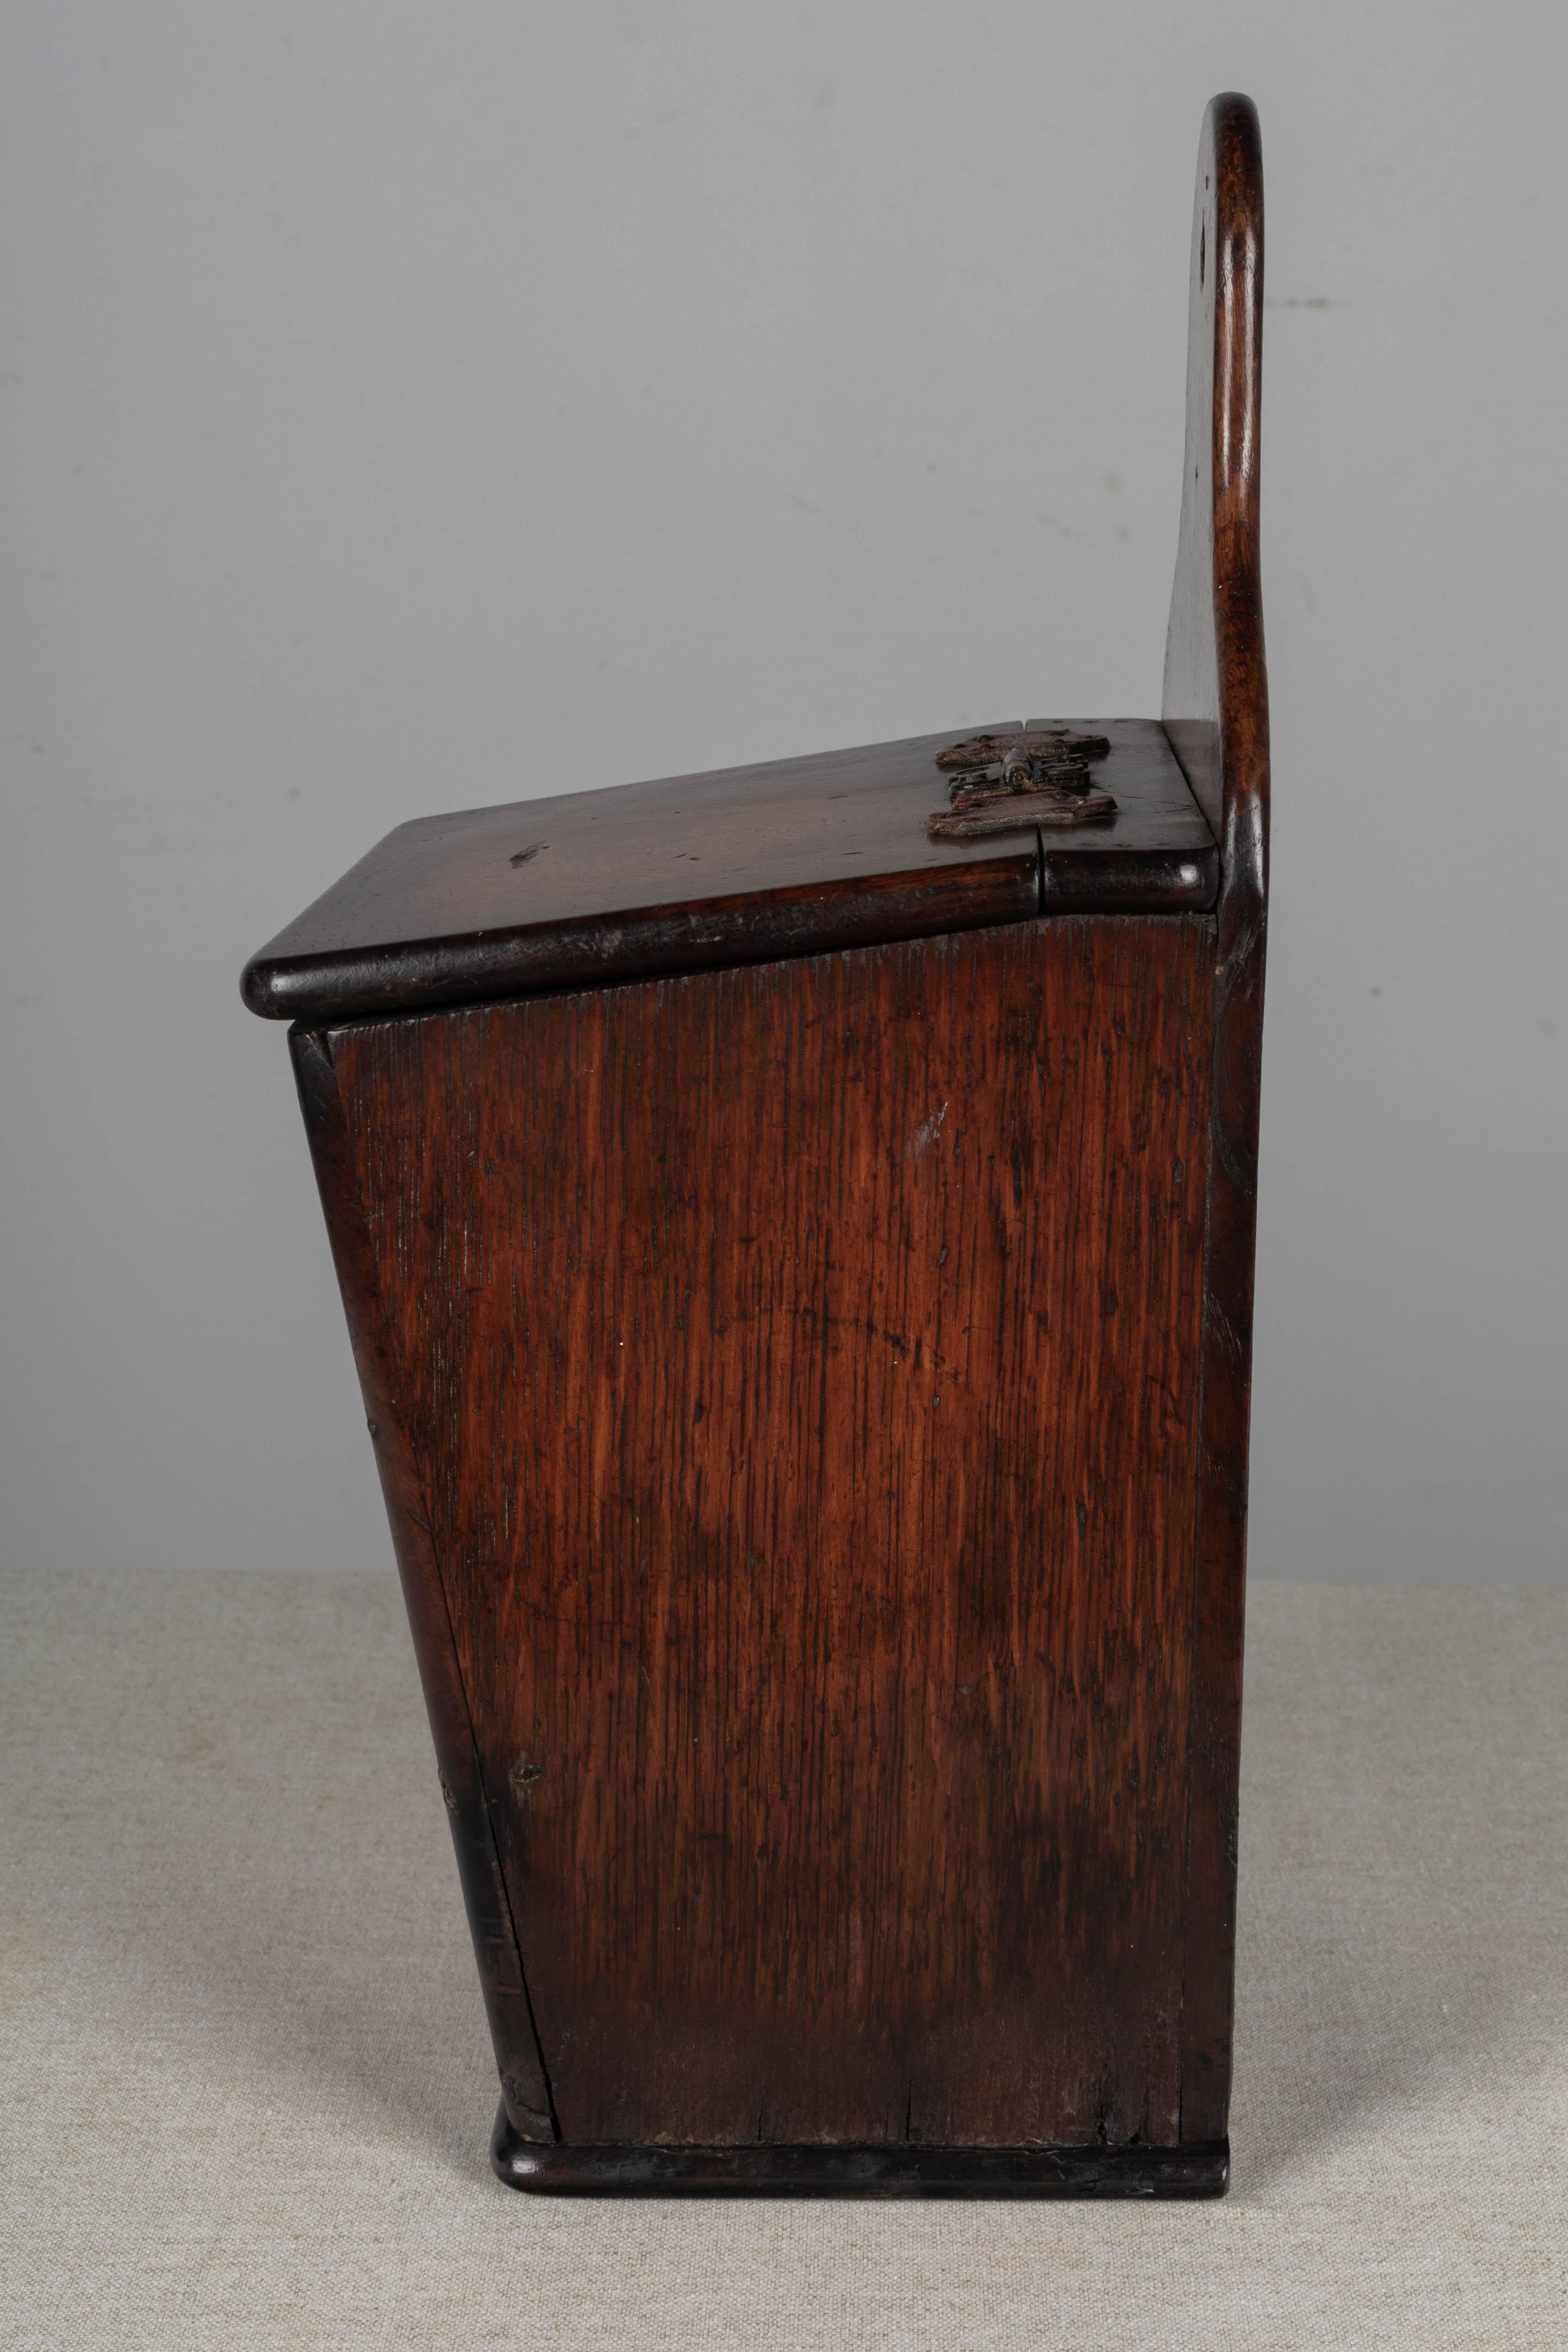 Leather Early 19th Century French Boite À Sel or Salt Box For Sale